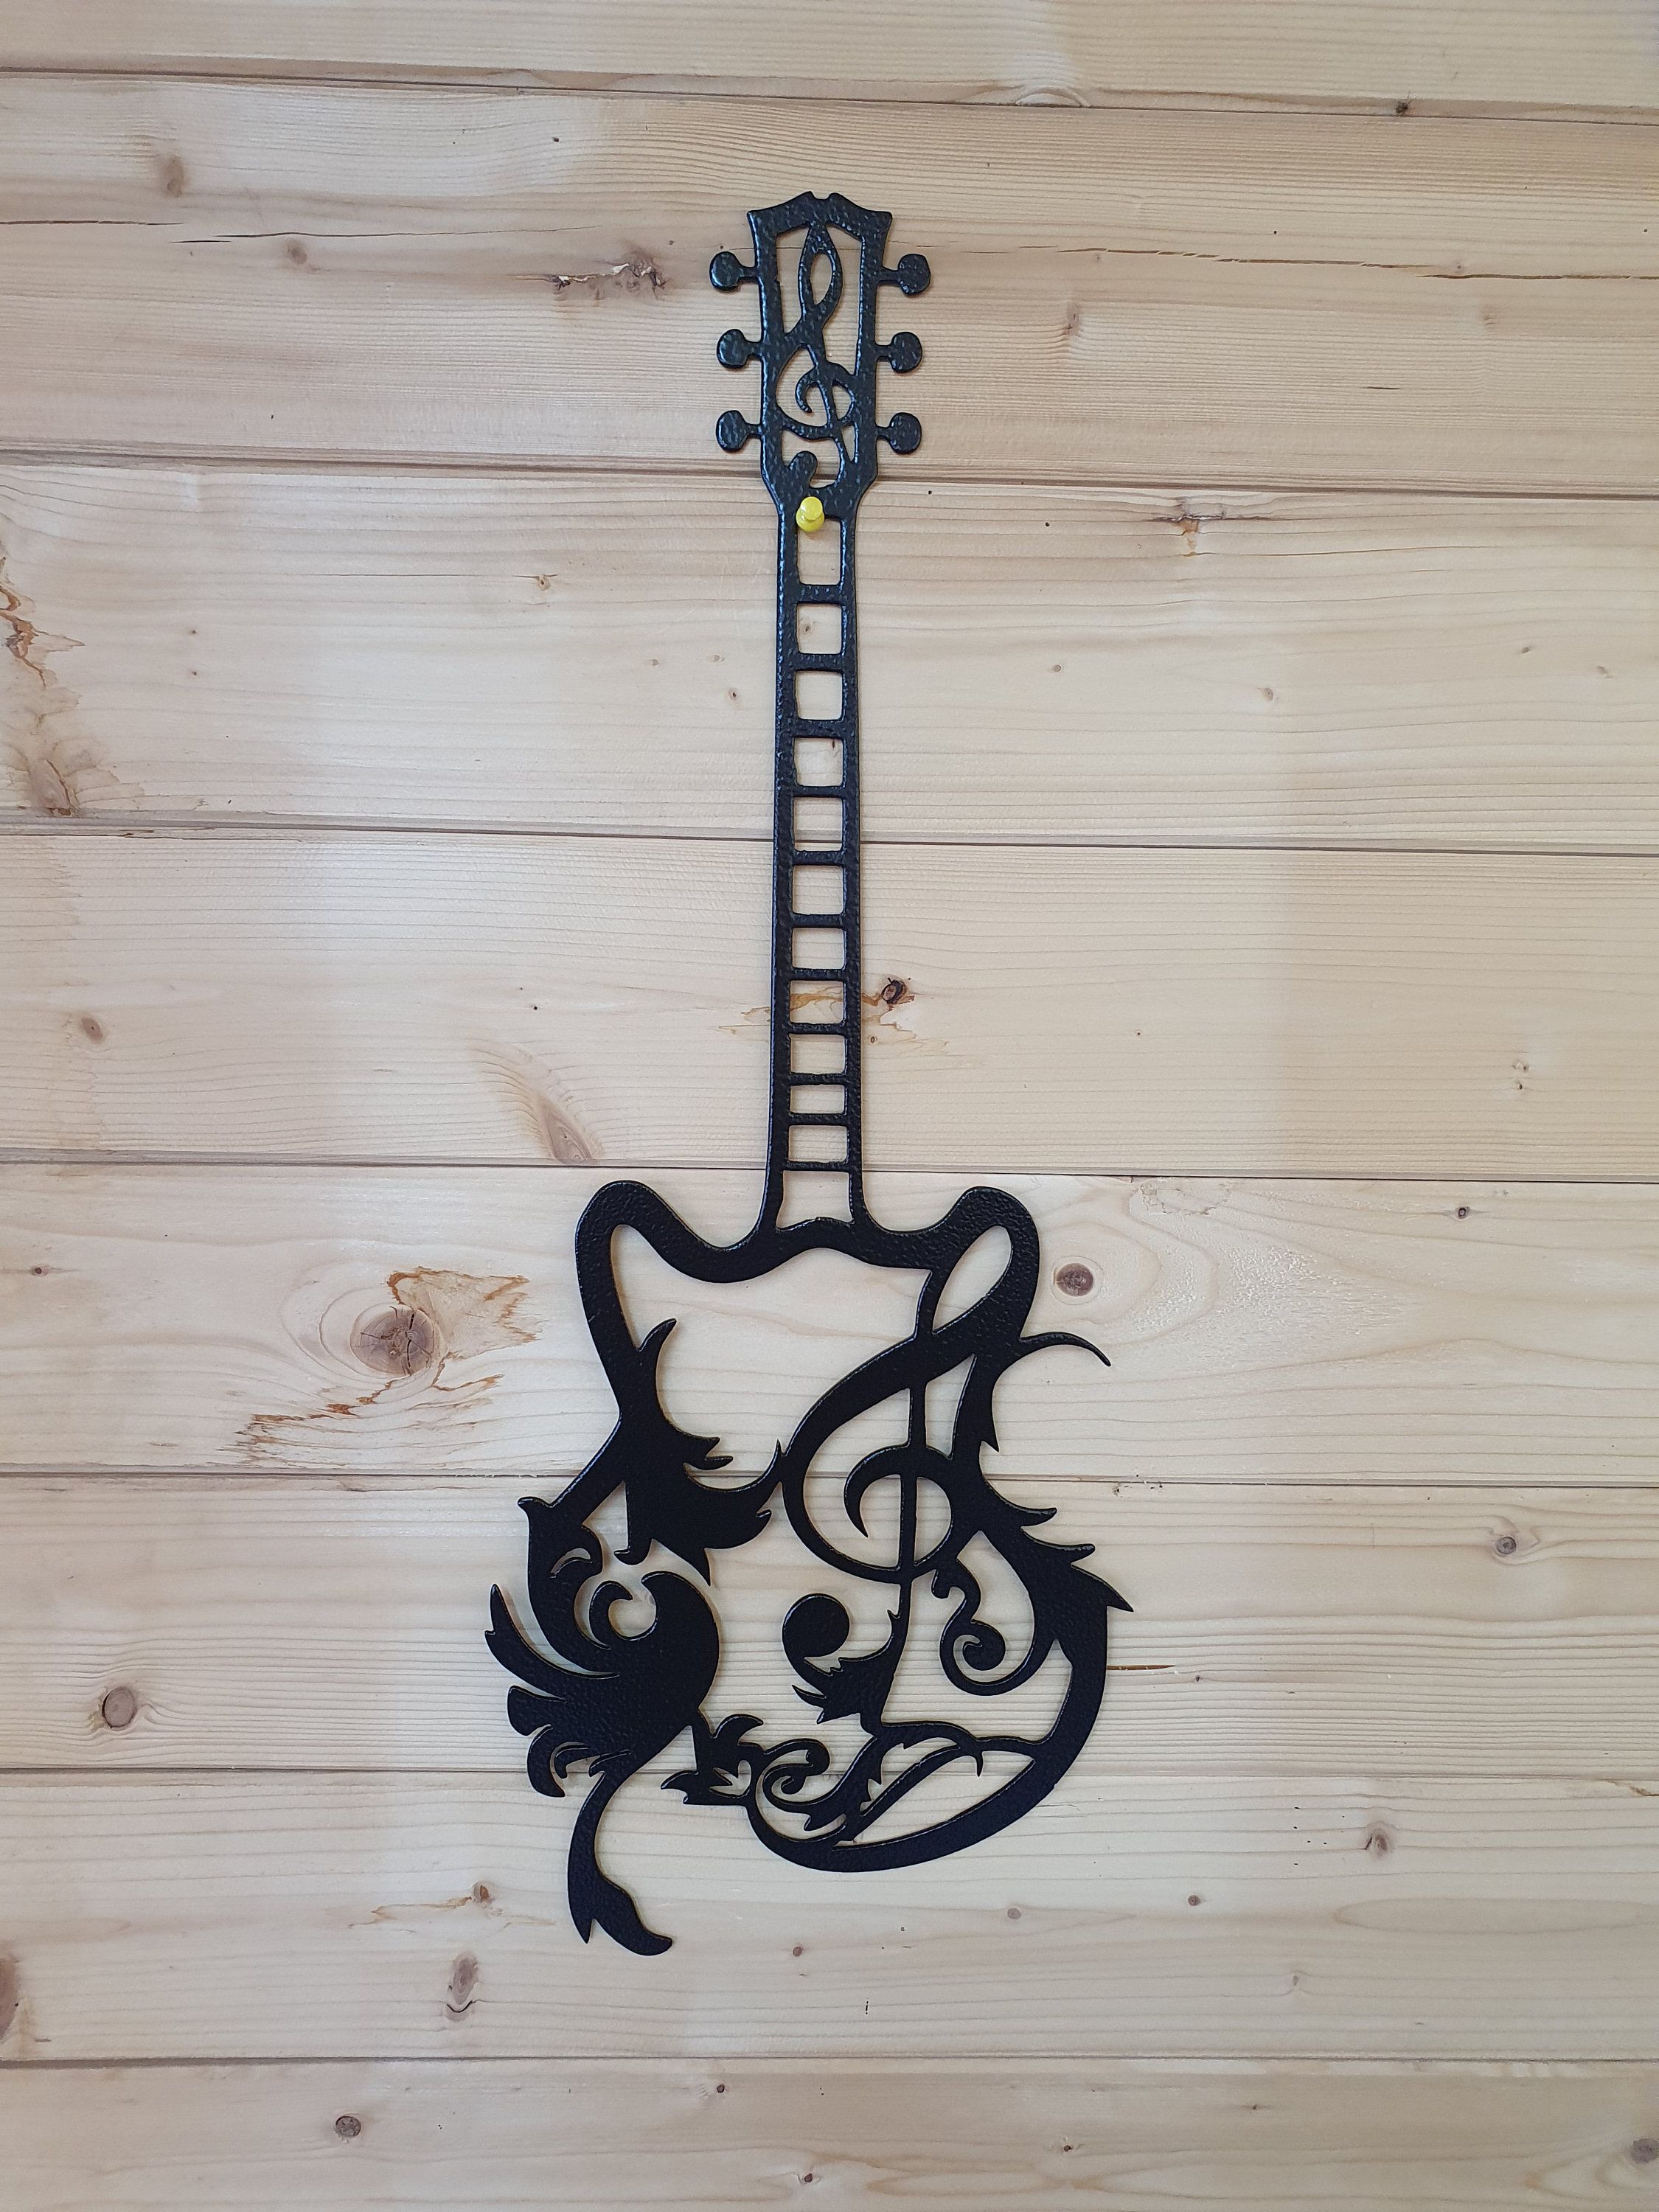 Guitar Wall Art Metal Wall Art Home Decor Home & Garden – Etsy With Regard To Weather Resistant Metal Wall Art (View 8 of 15)